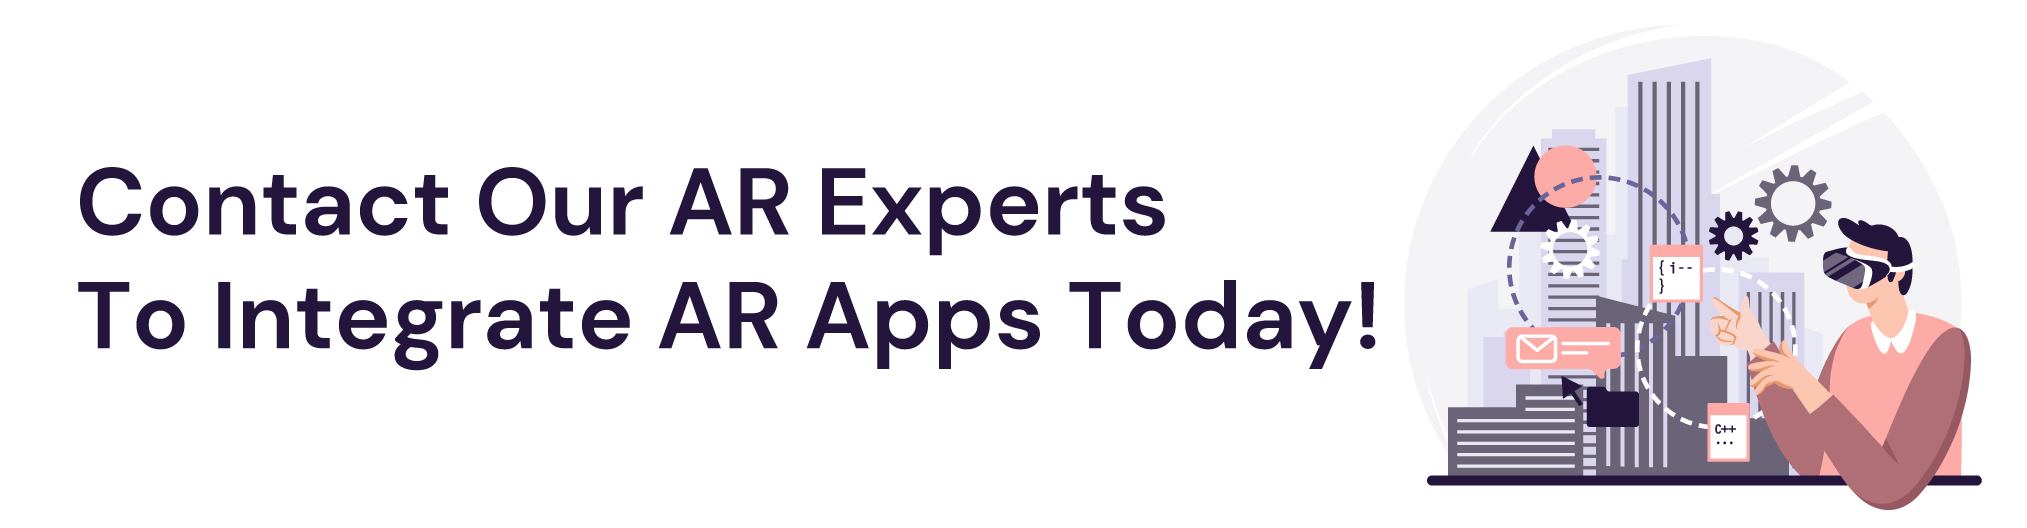 use of AR contact experts 